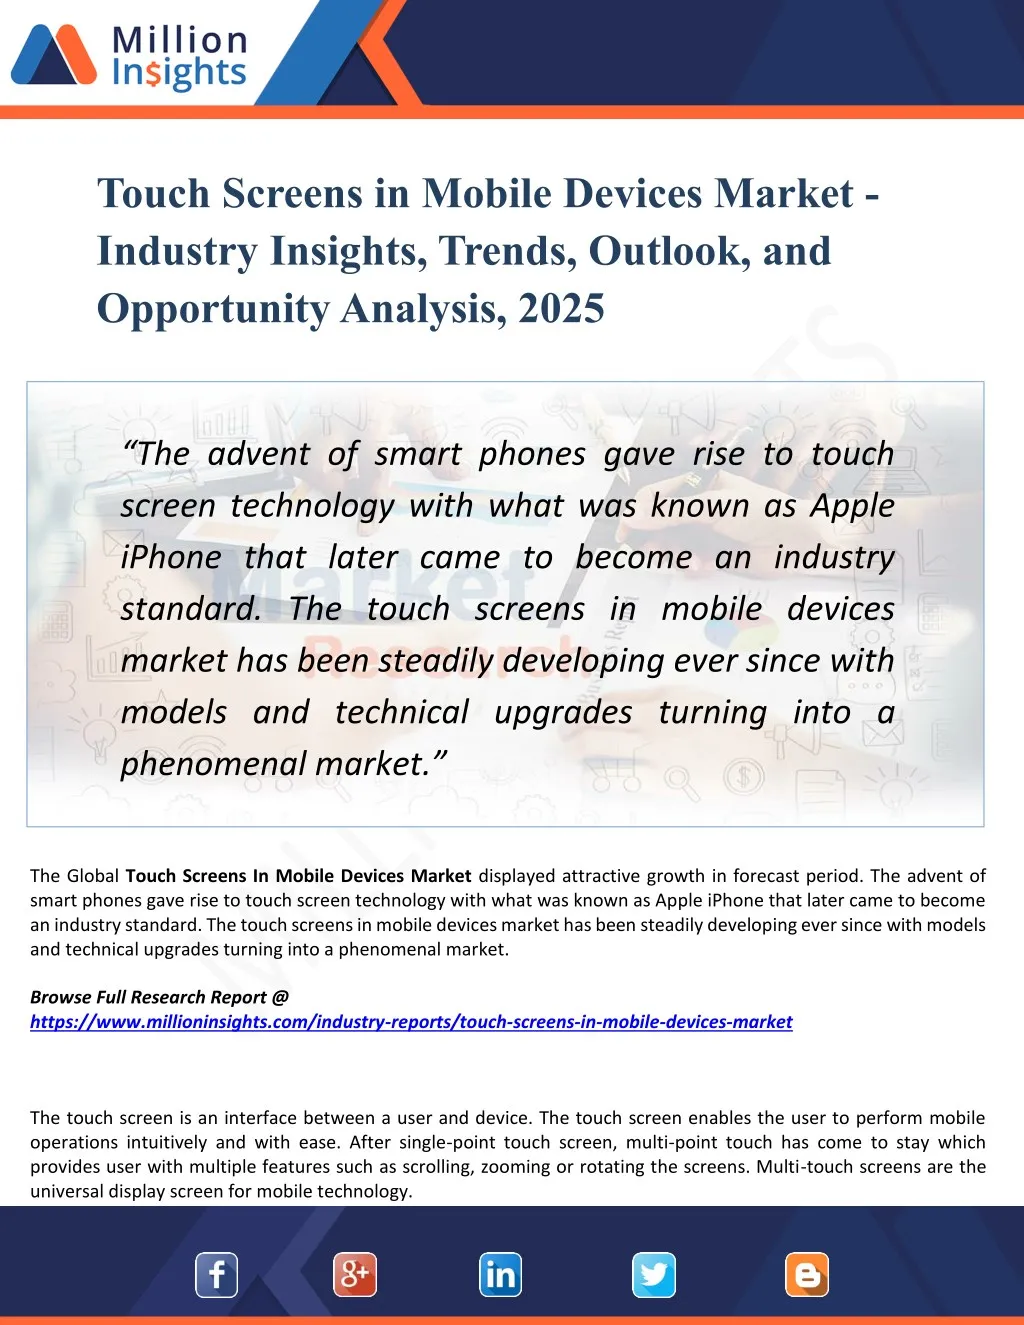 touch screens in mobile devices market industry